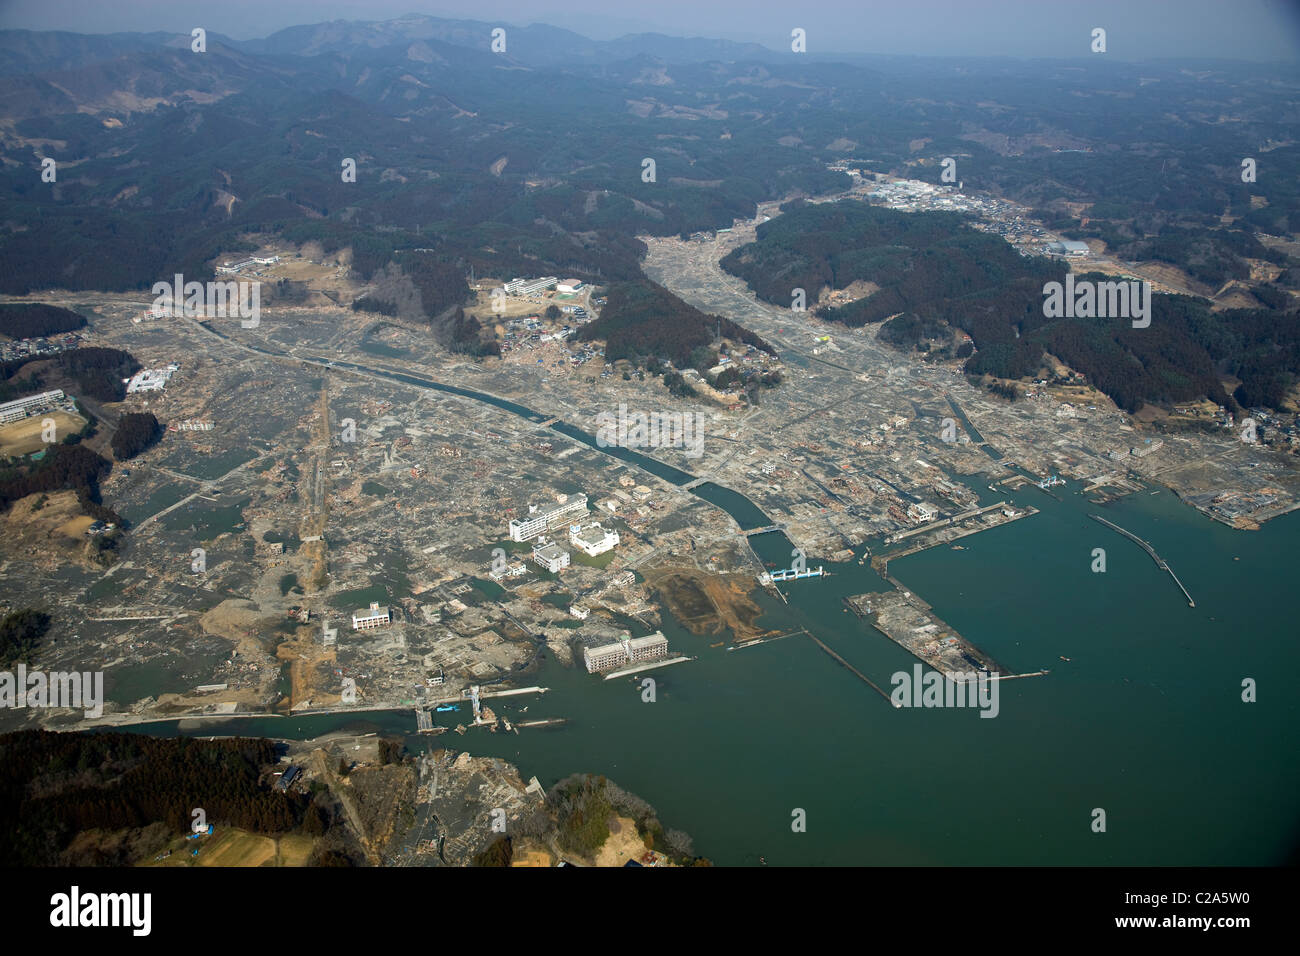 Aerial view of damage to Minamisanriku, Miyagi Prefecture after a 9. 0 magnitude earthquake and subsequent tsunami devastated Stock Photo